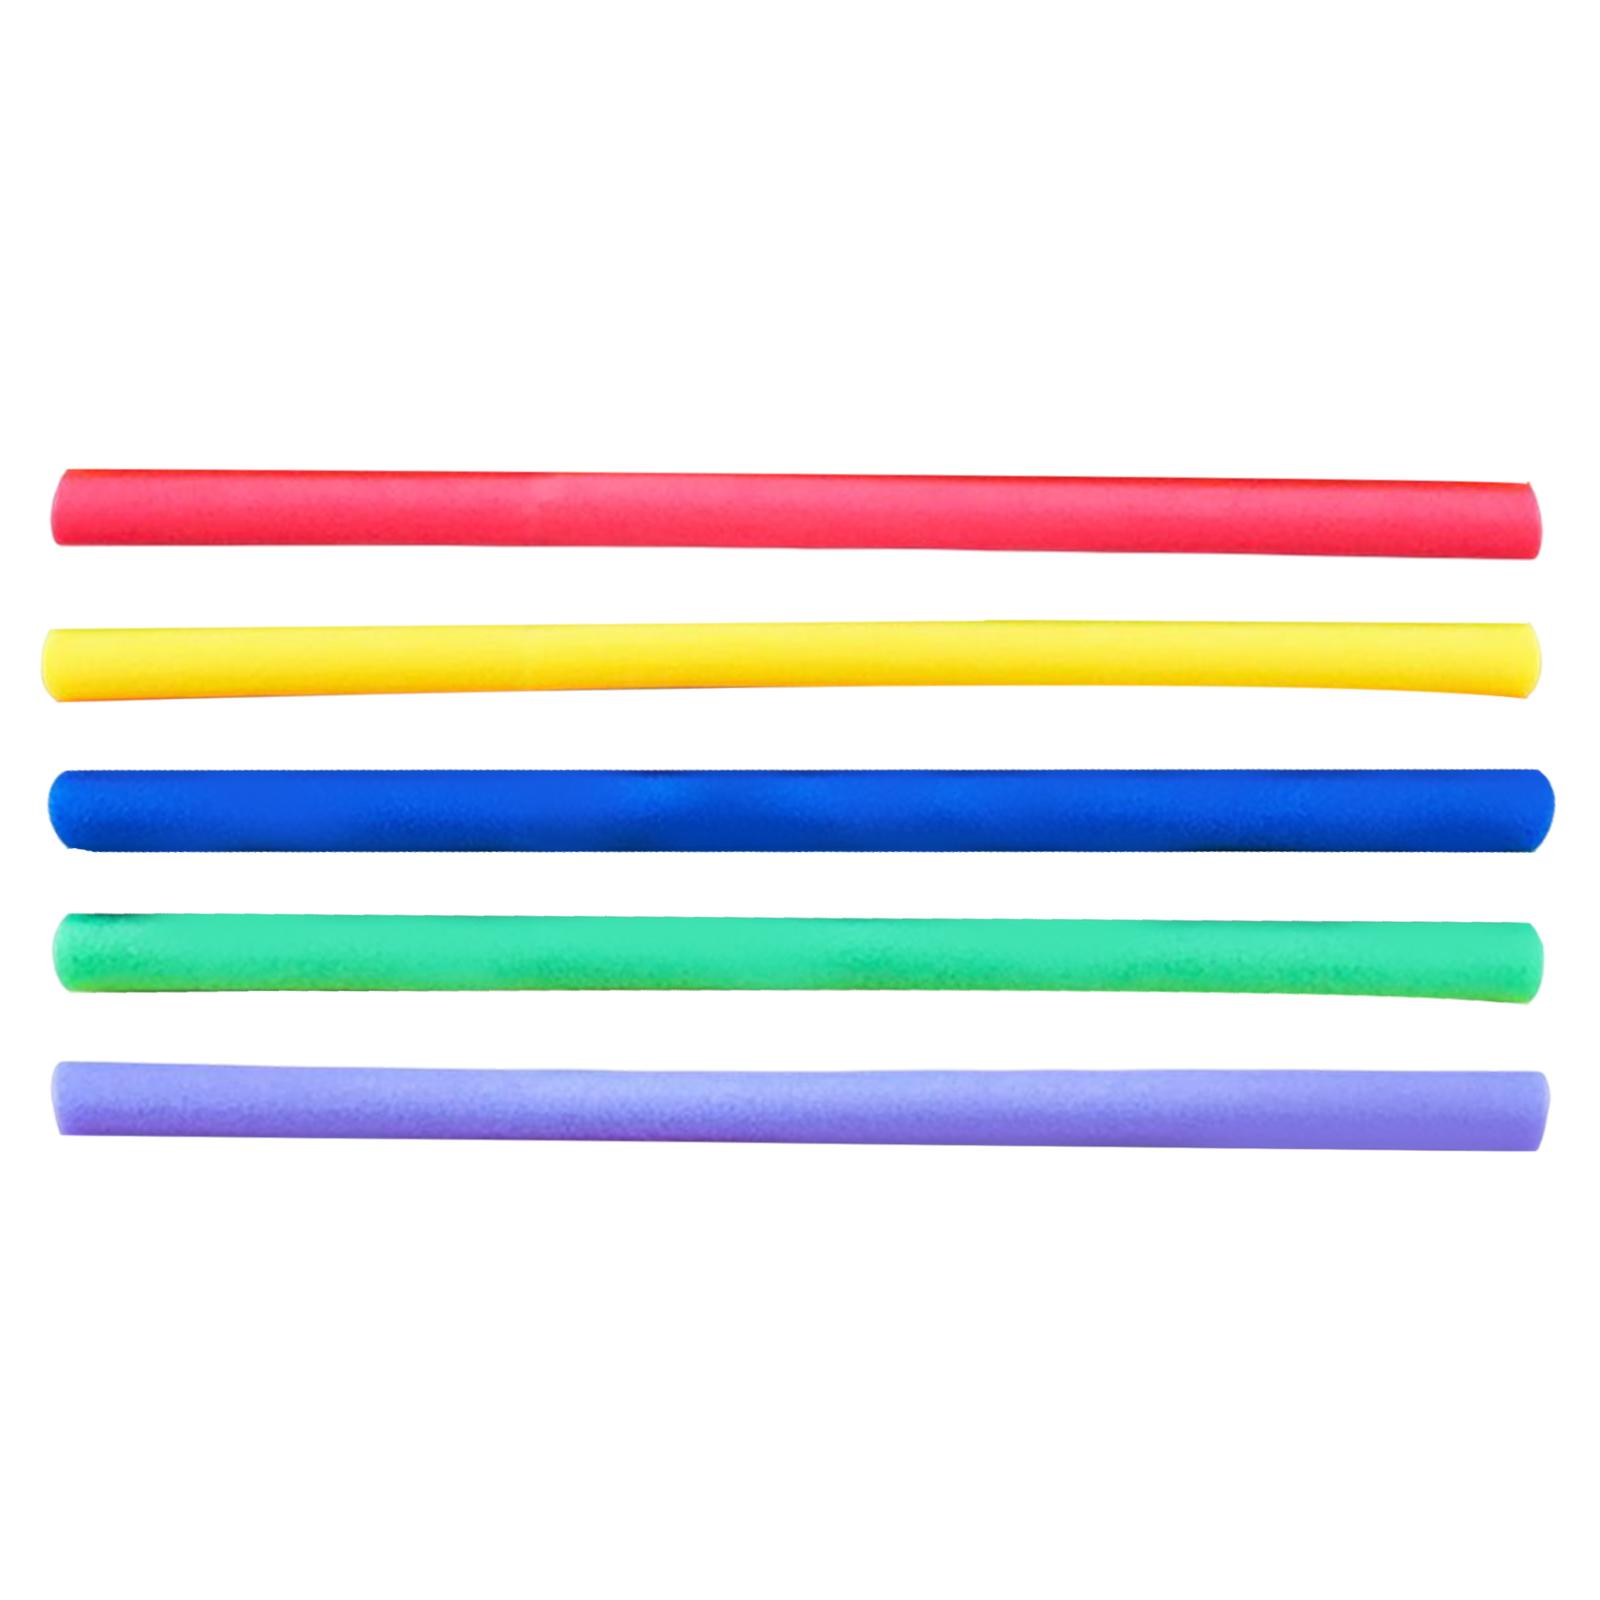 Pool Noodles Gym Sponge Tube Float Swimming Float Exercise Toy Aquatic Supplies